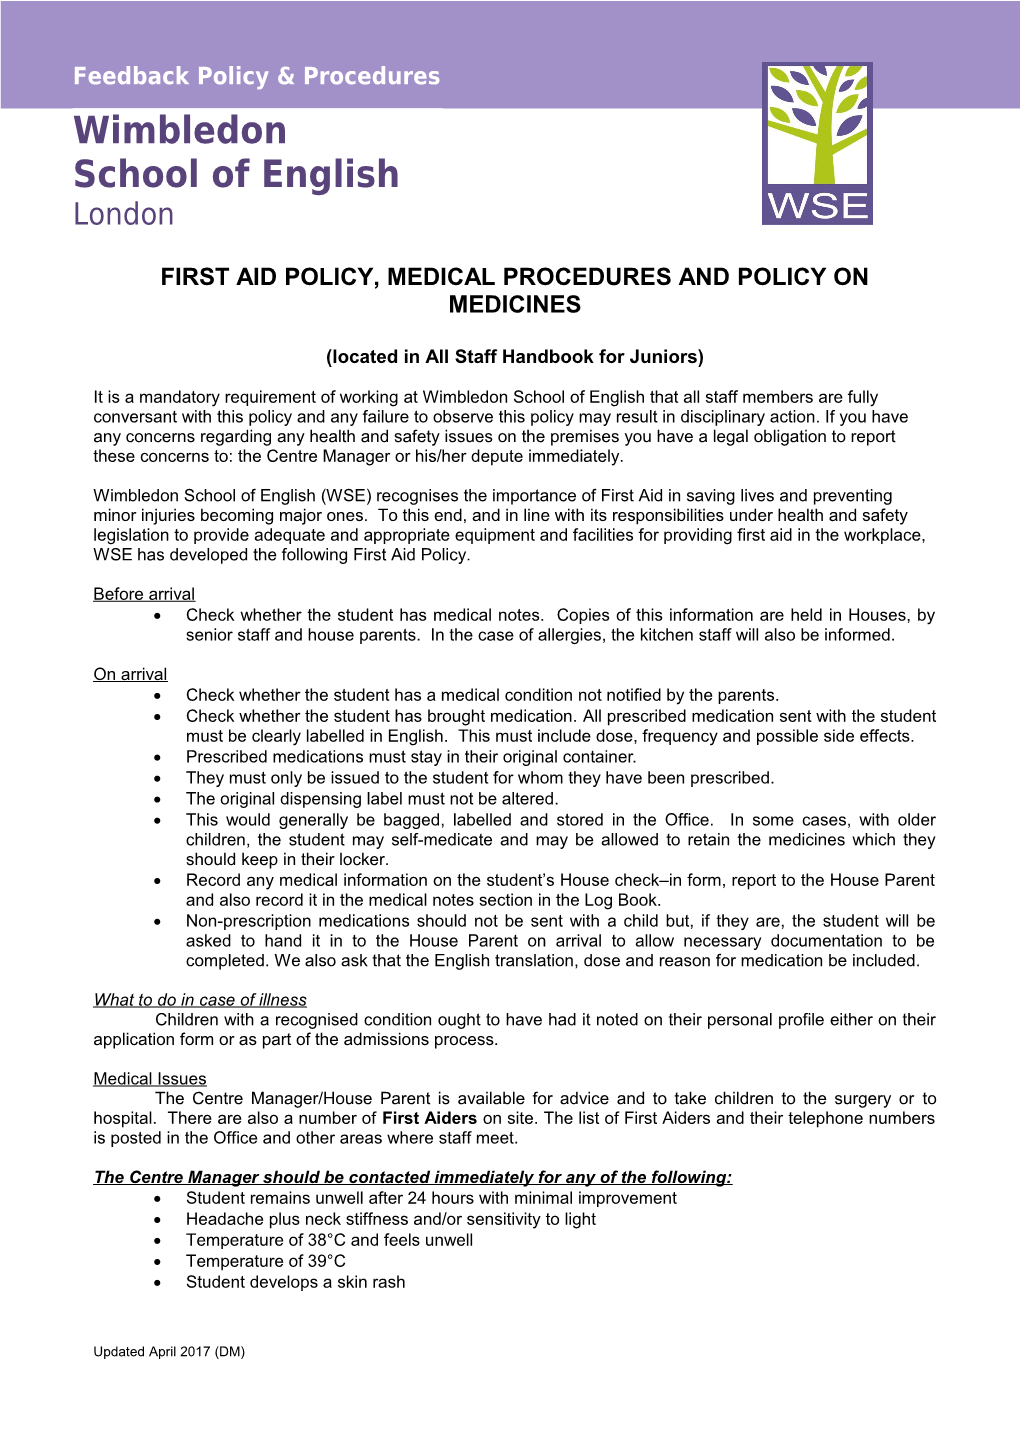 First Aid Policy, Medical Procedures and Policy on Medicines